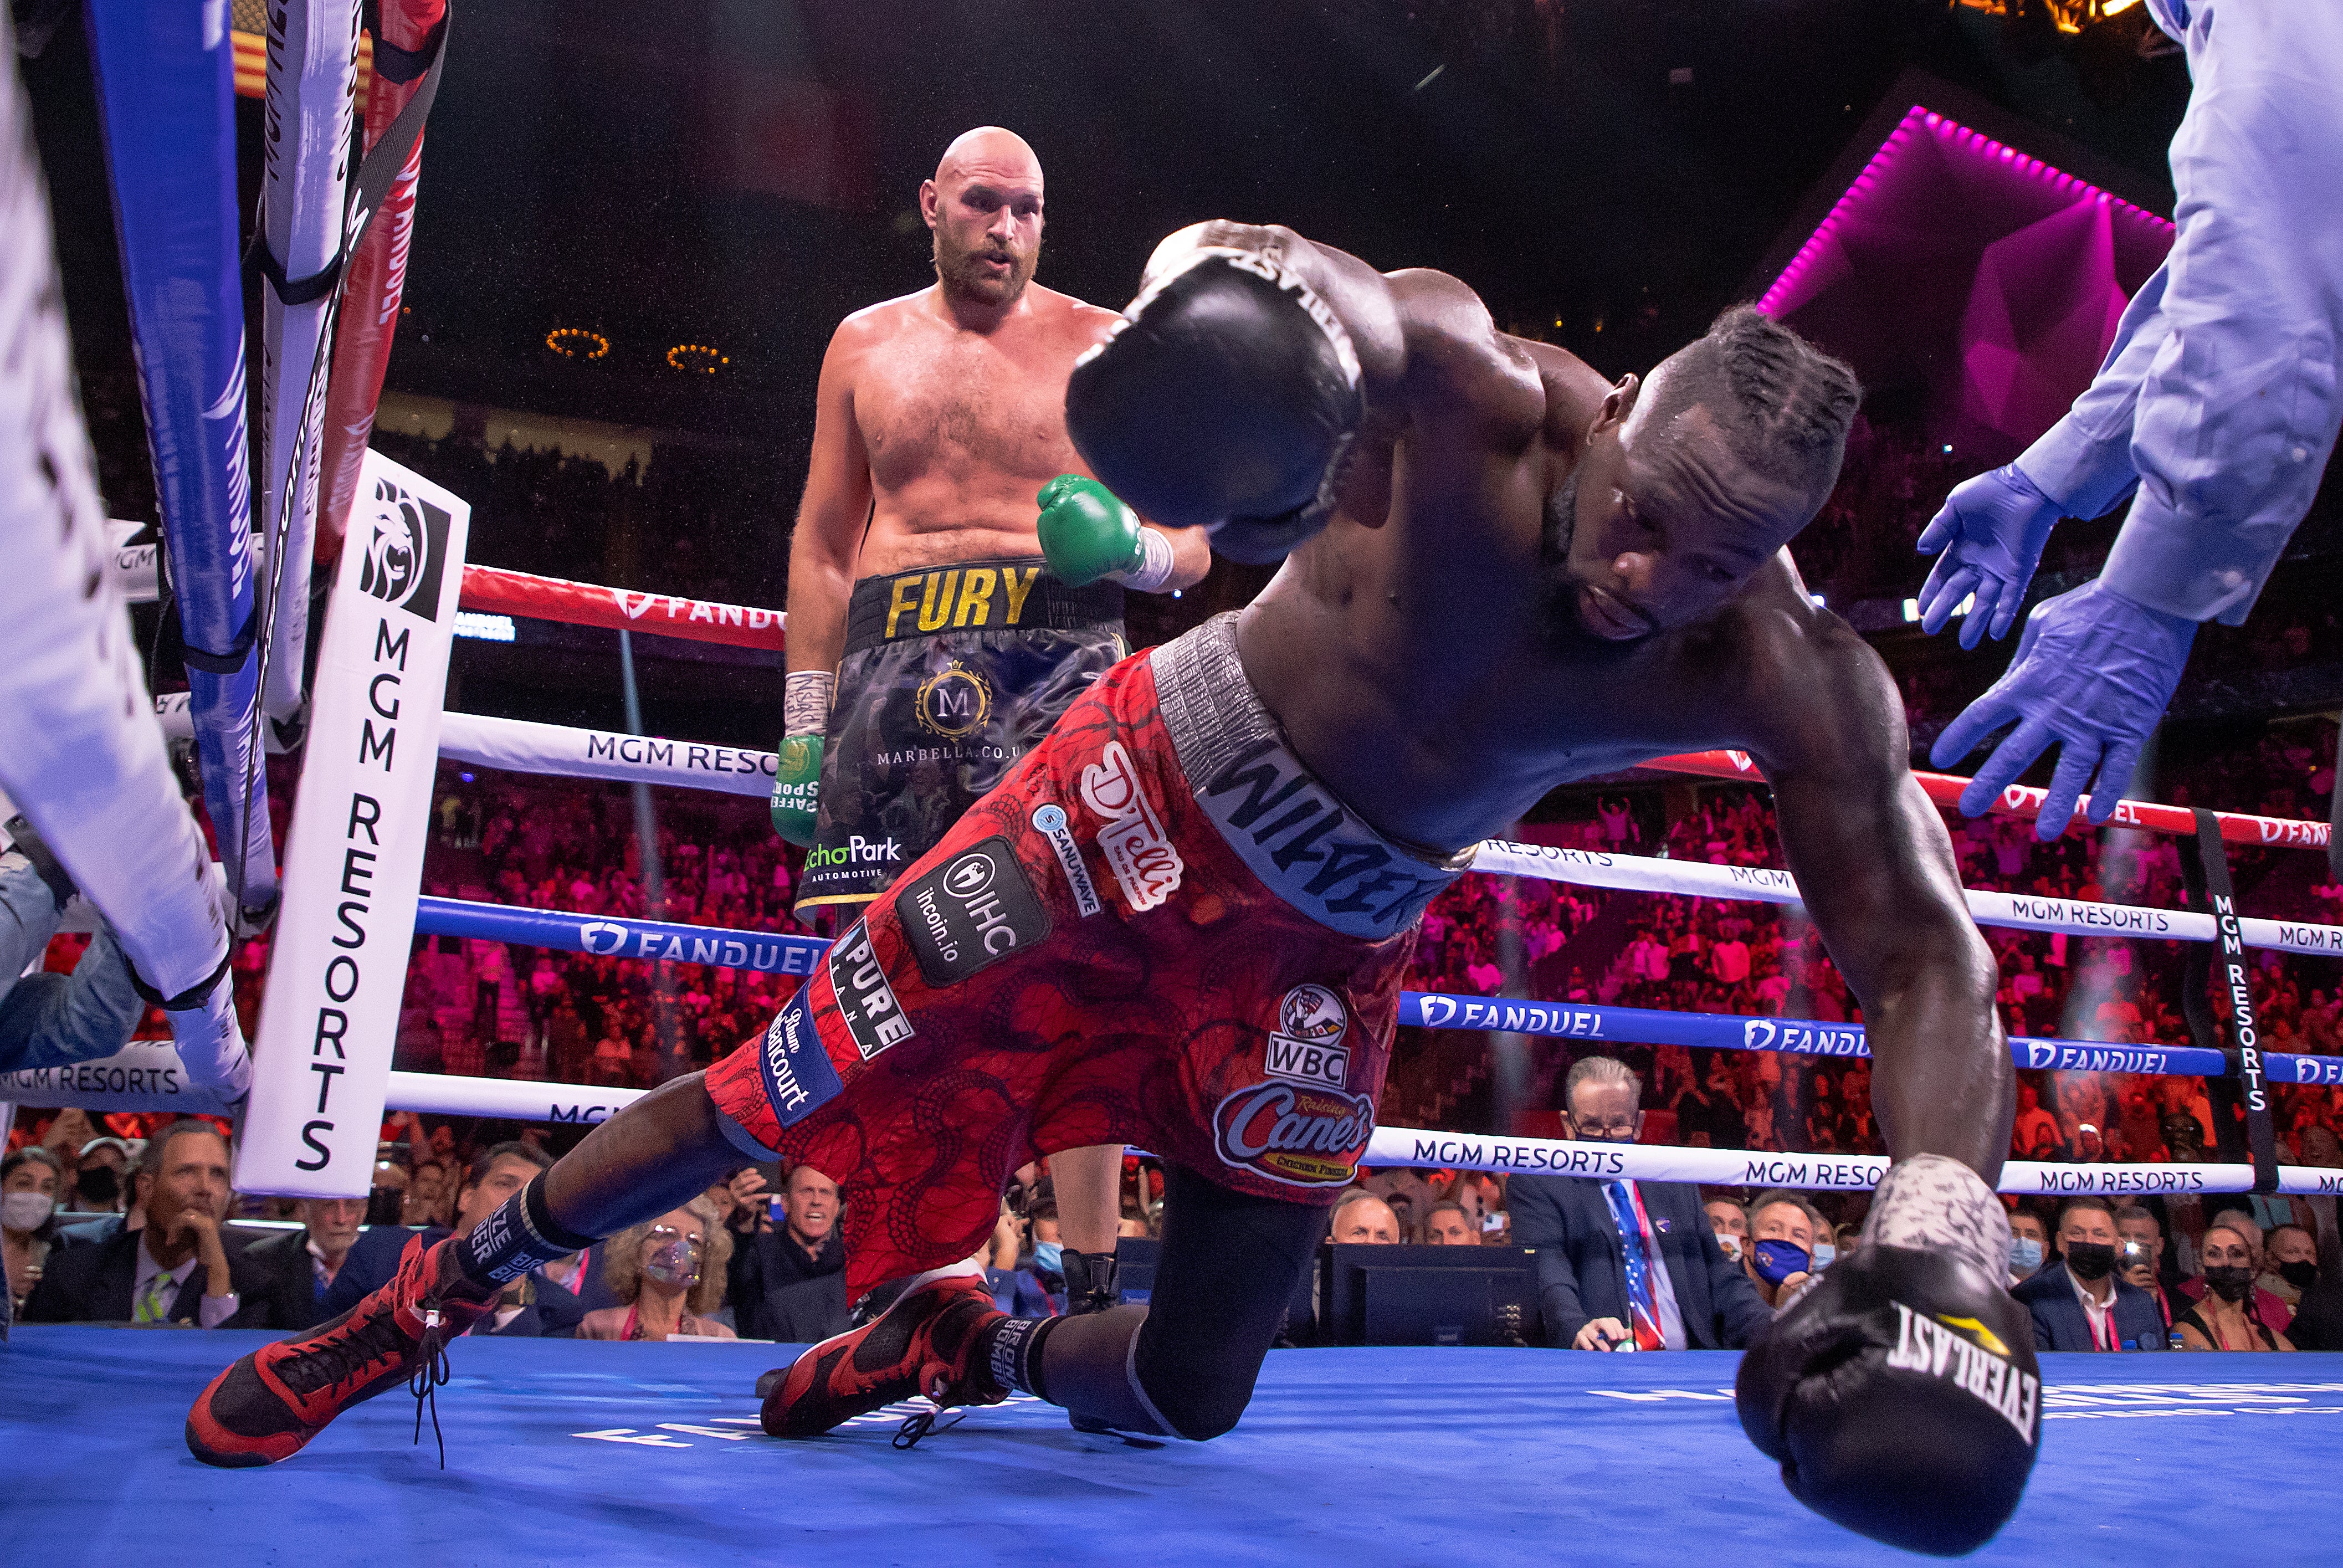 Wilder last fought in October, when he was stopped by Tyson Fury again